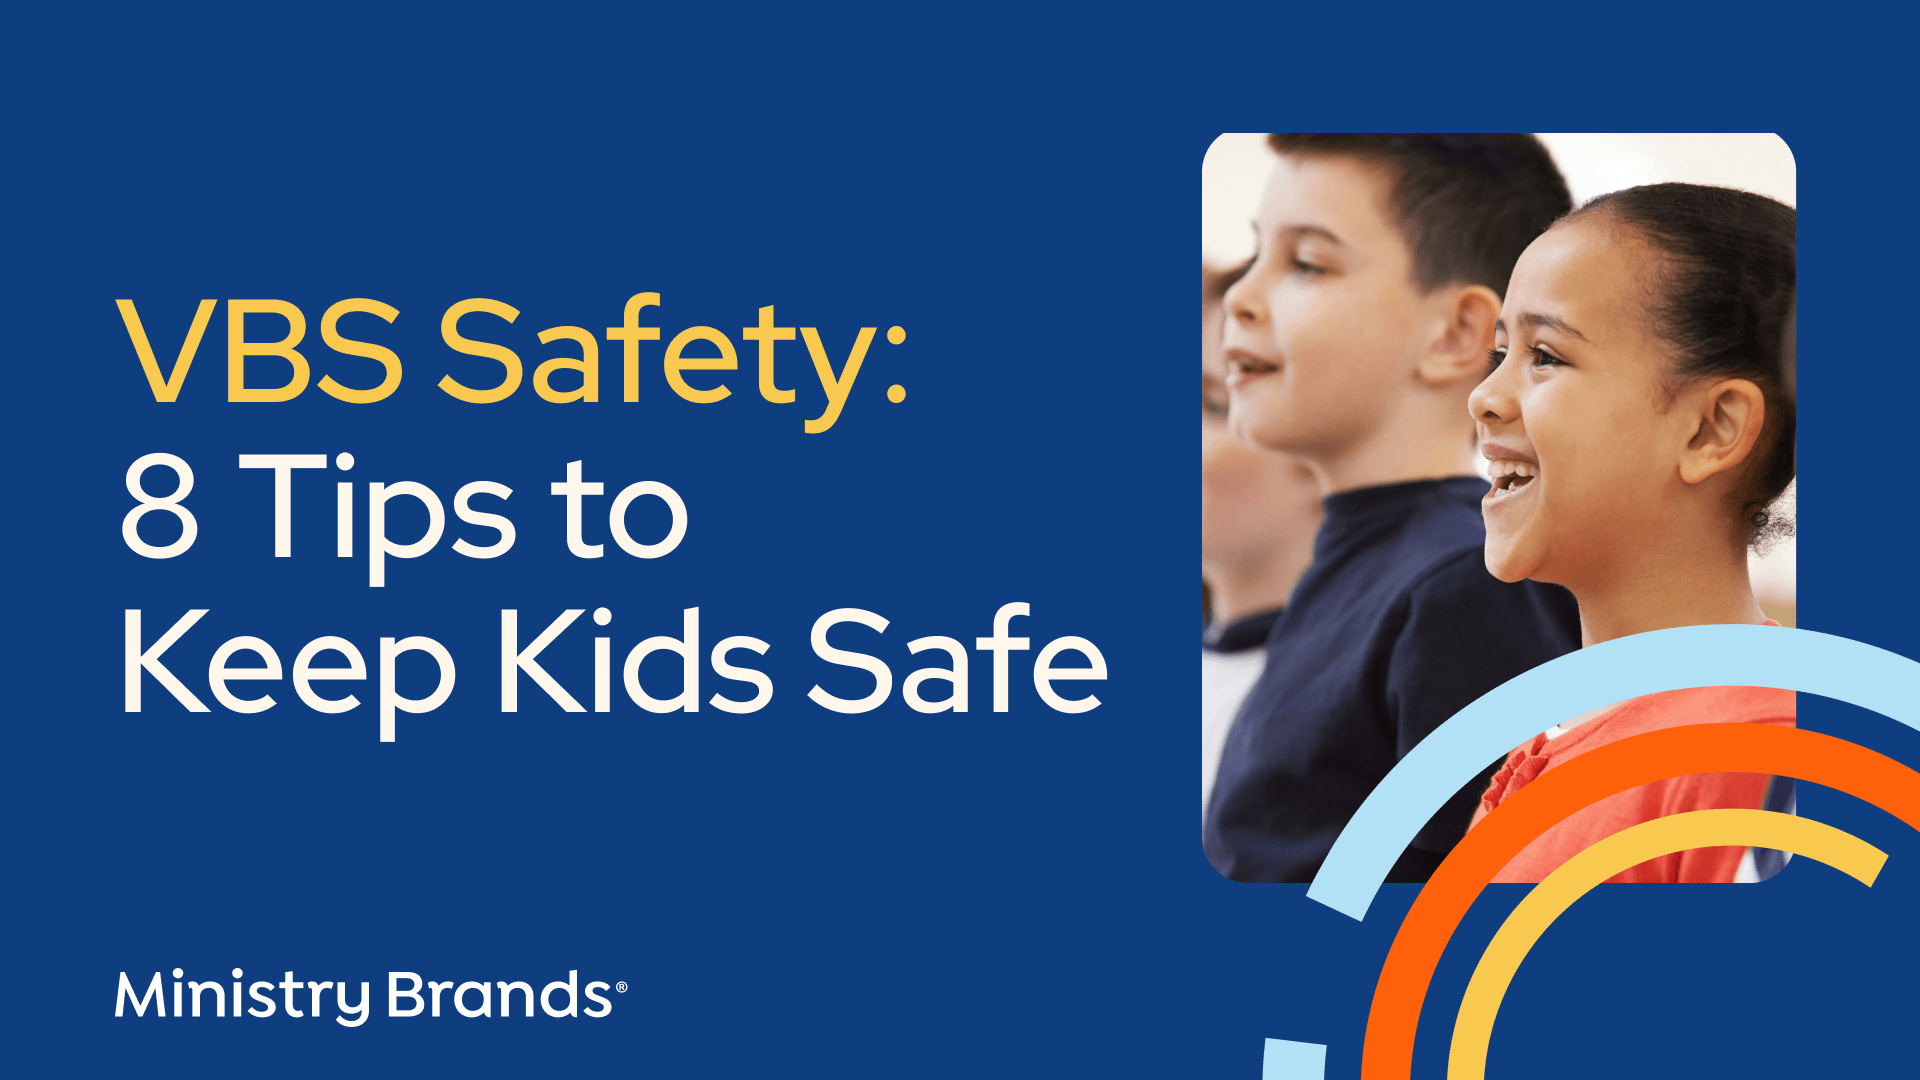 VBS Safety: 8 Tips to Keep Kids Safe